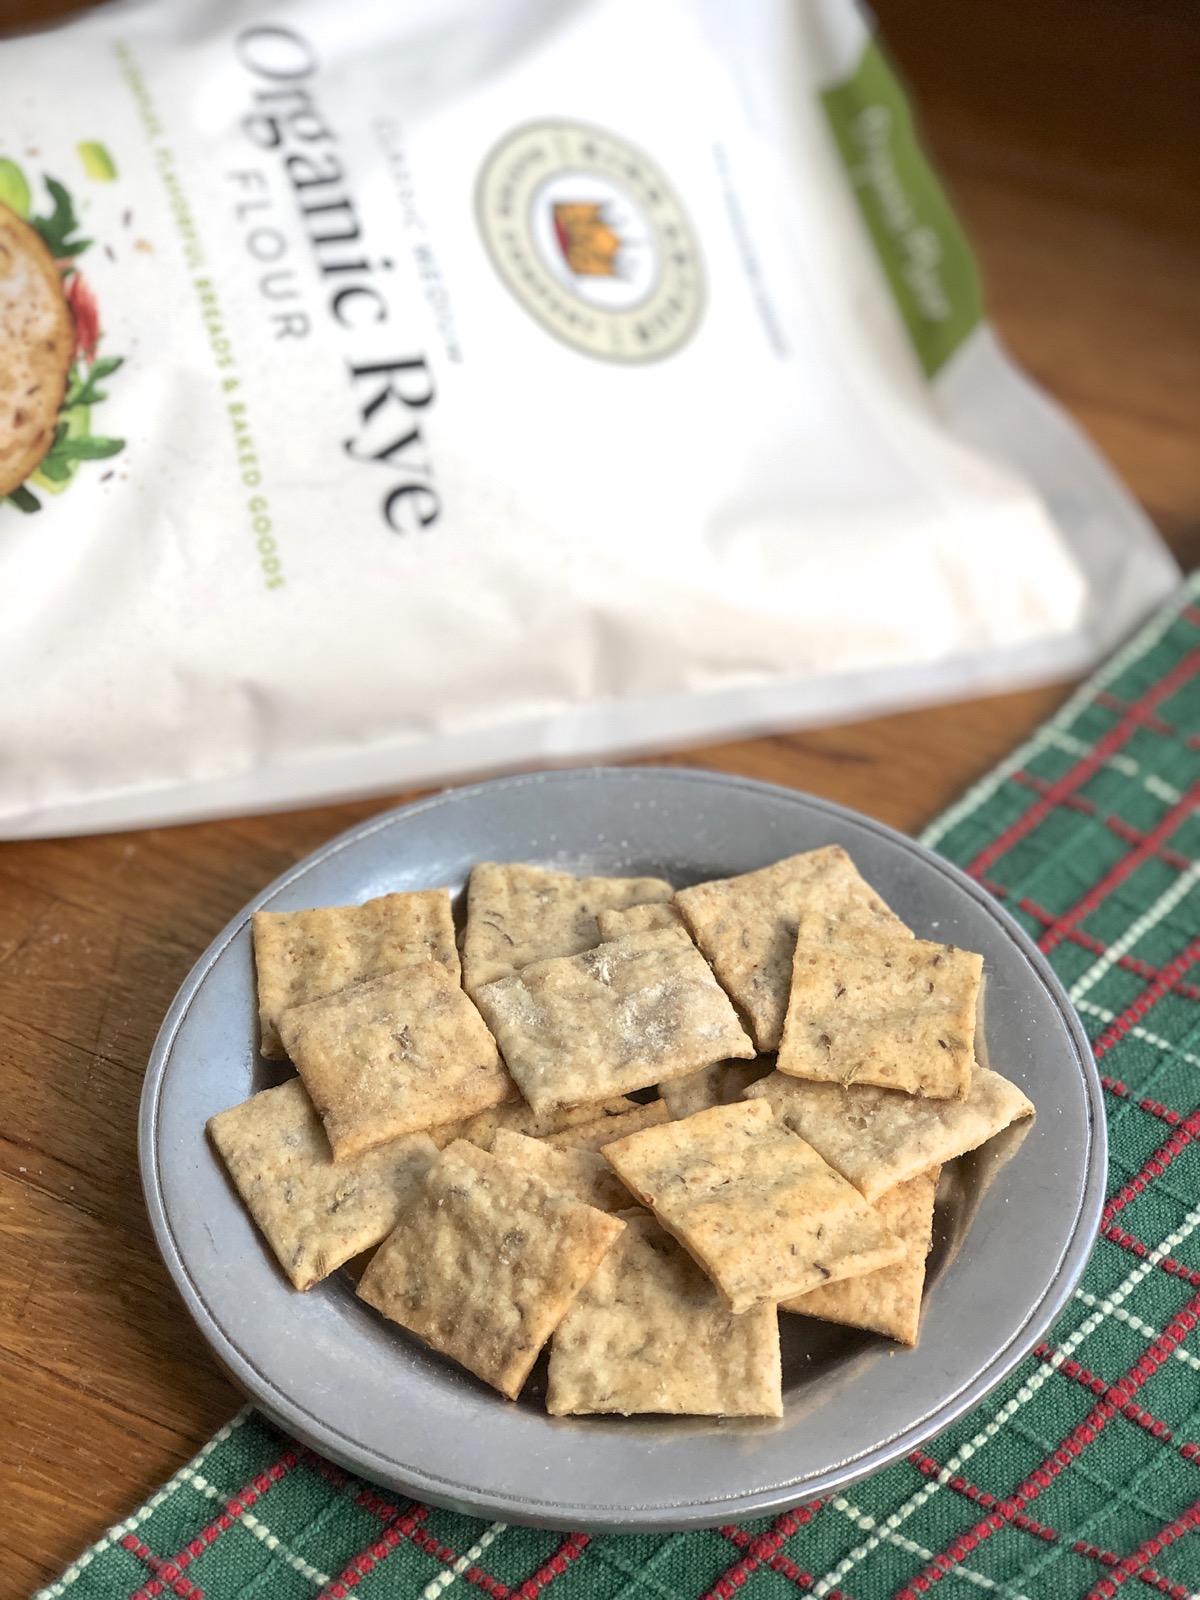 Sourdough crackers on a plate in front of a bag of rye flour.